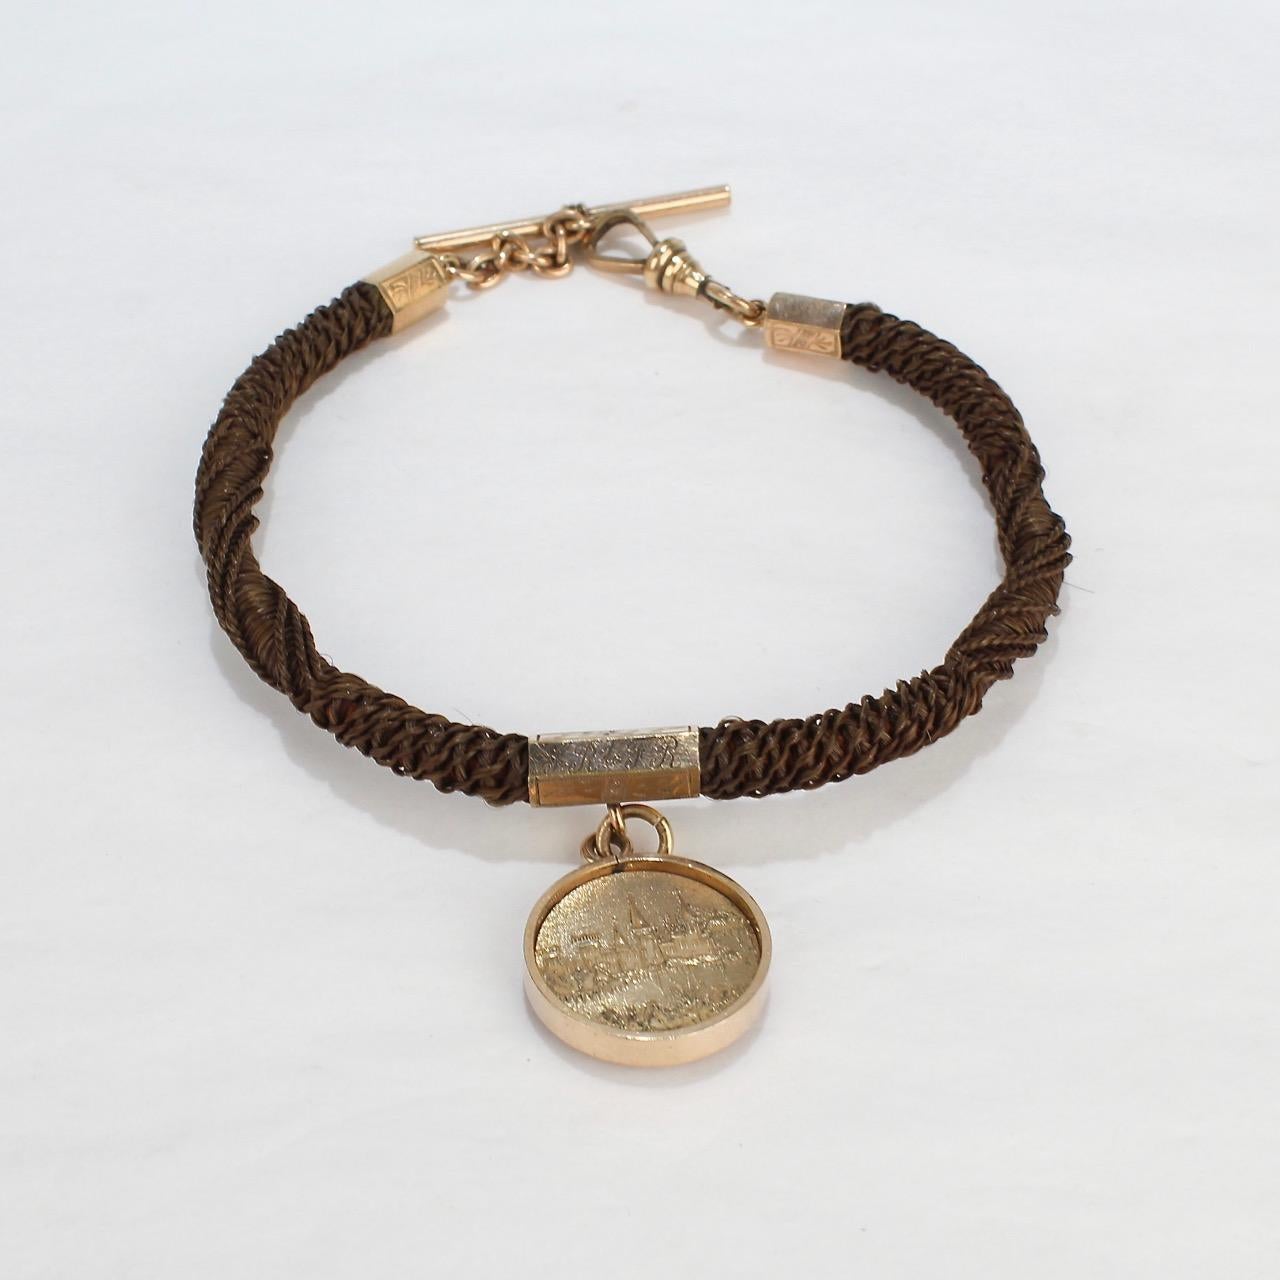 Victorian Antique Woven Hair and Gold-Filled Memorial Watch Chain with Odd Fellows Pendant